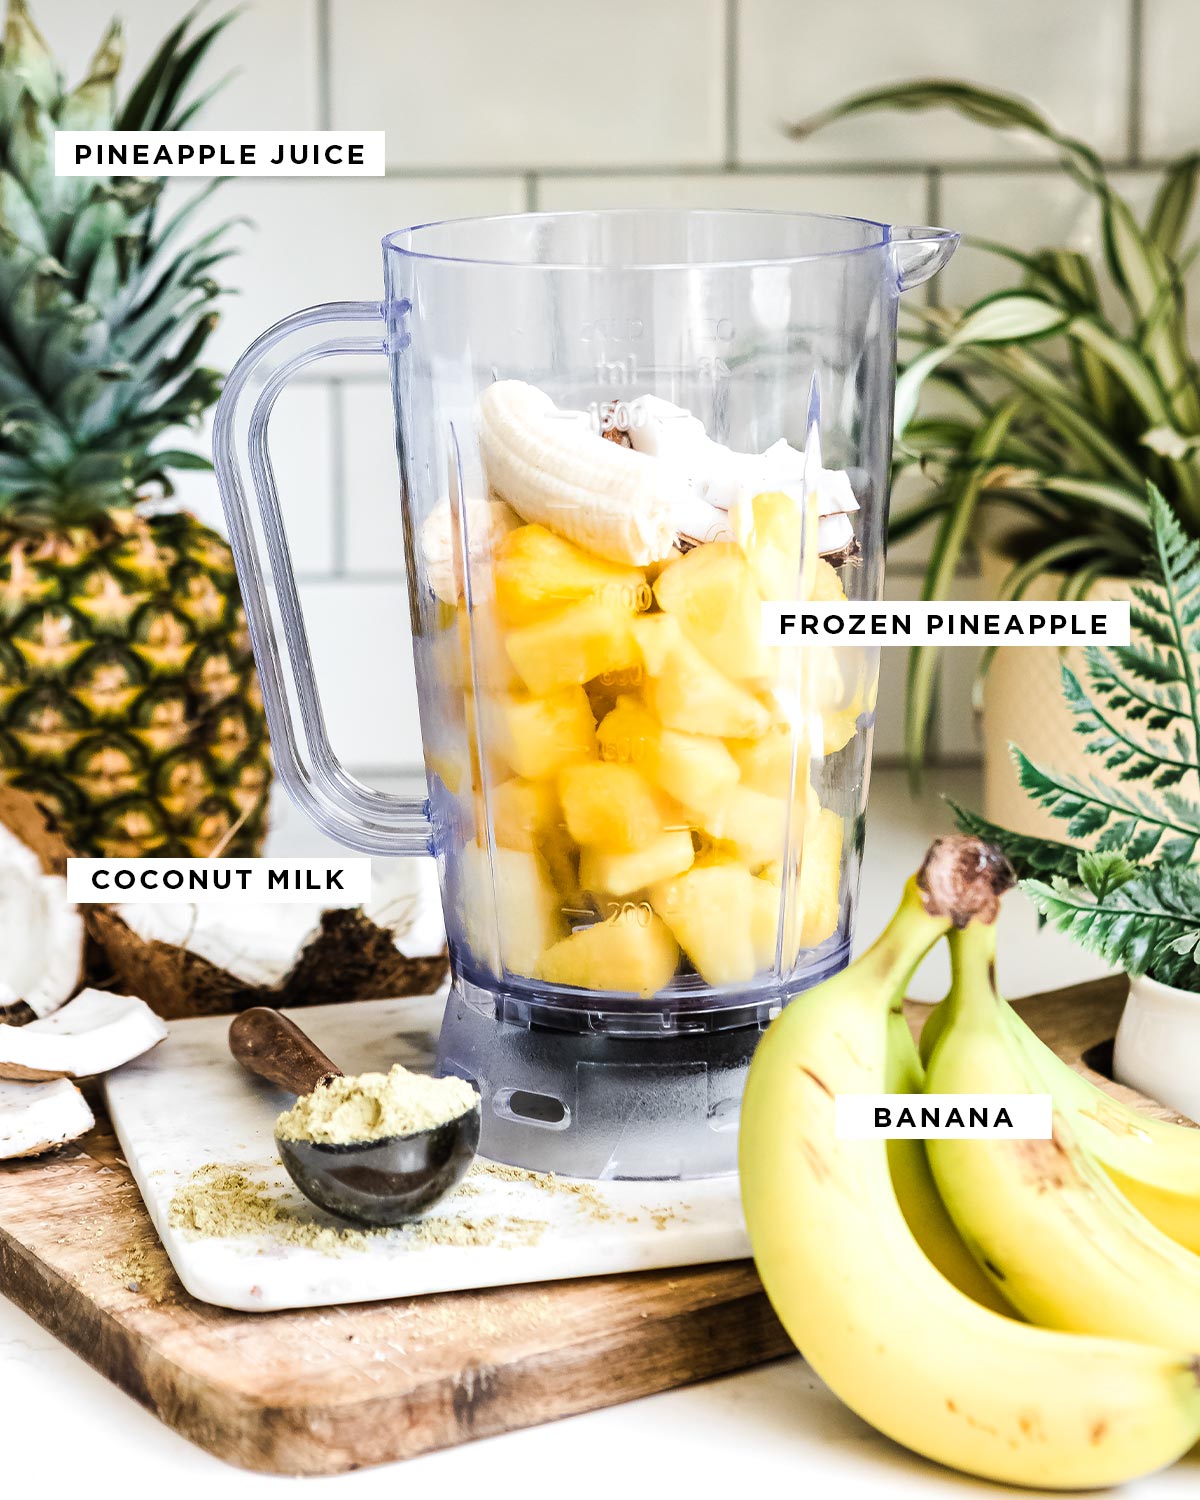 labeled ingredients including pineapple juice, frozen pineapple, coconut milk and banana.